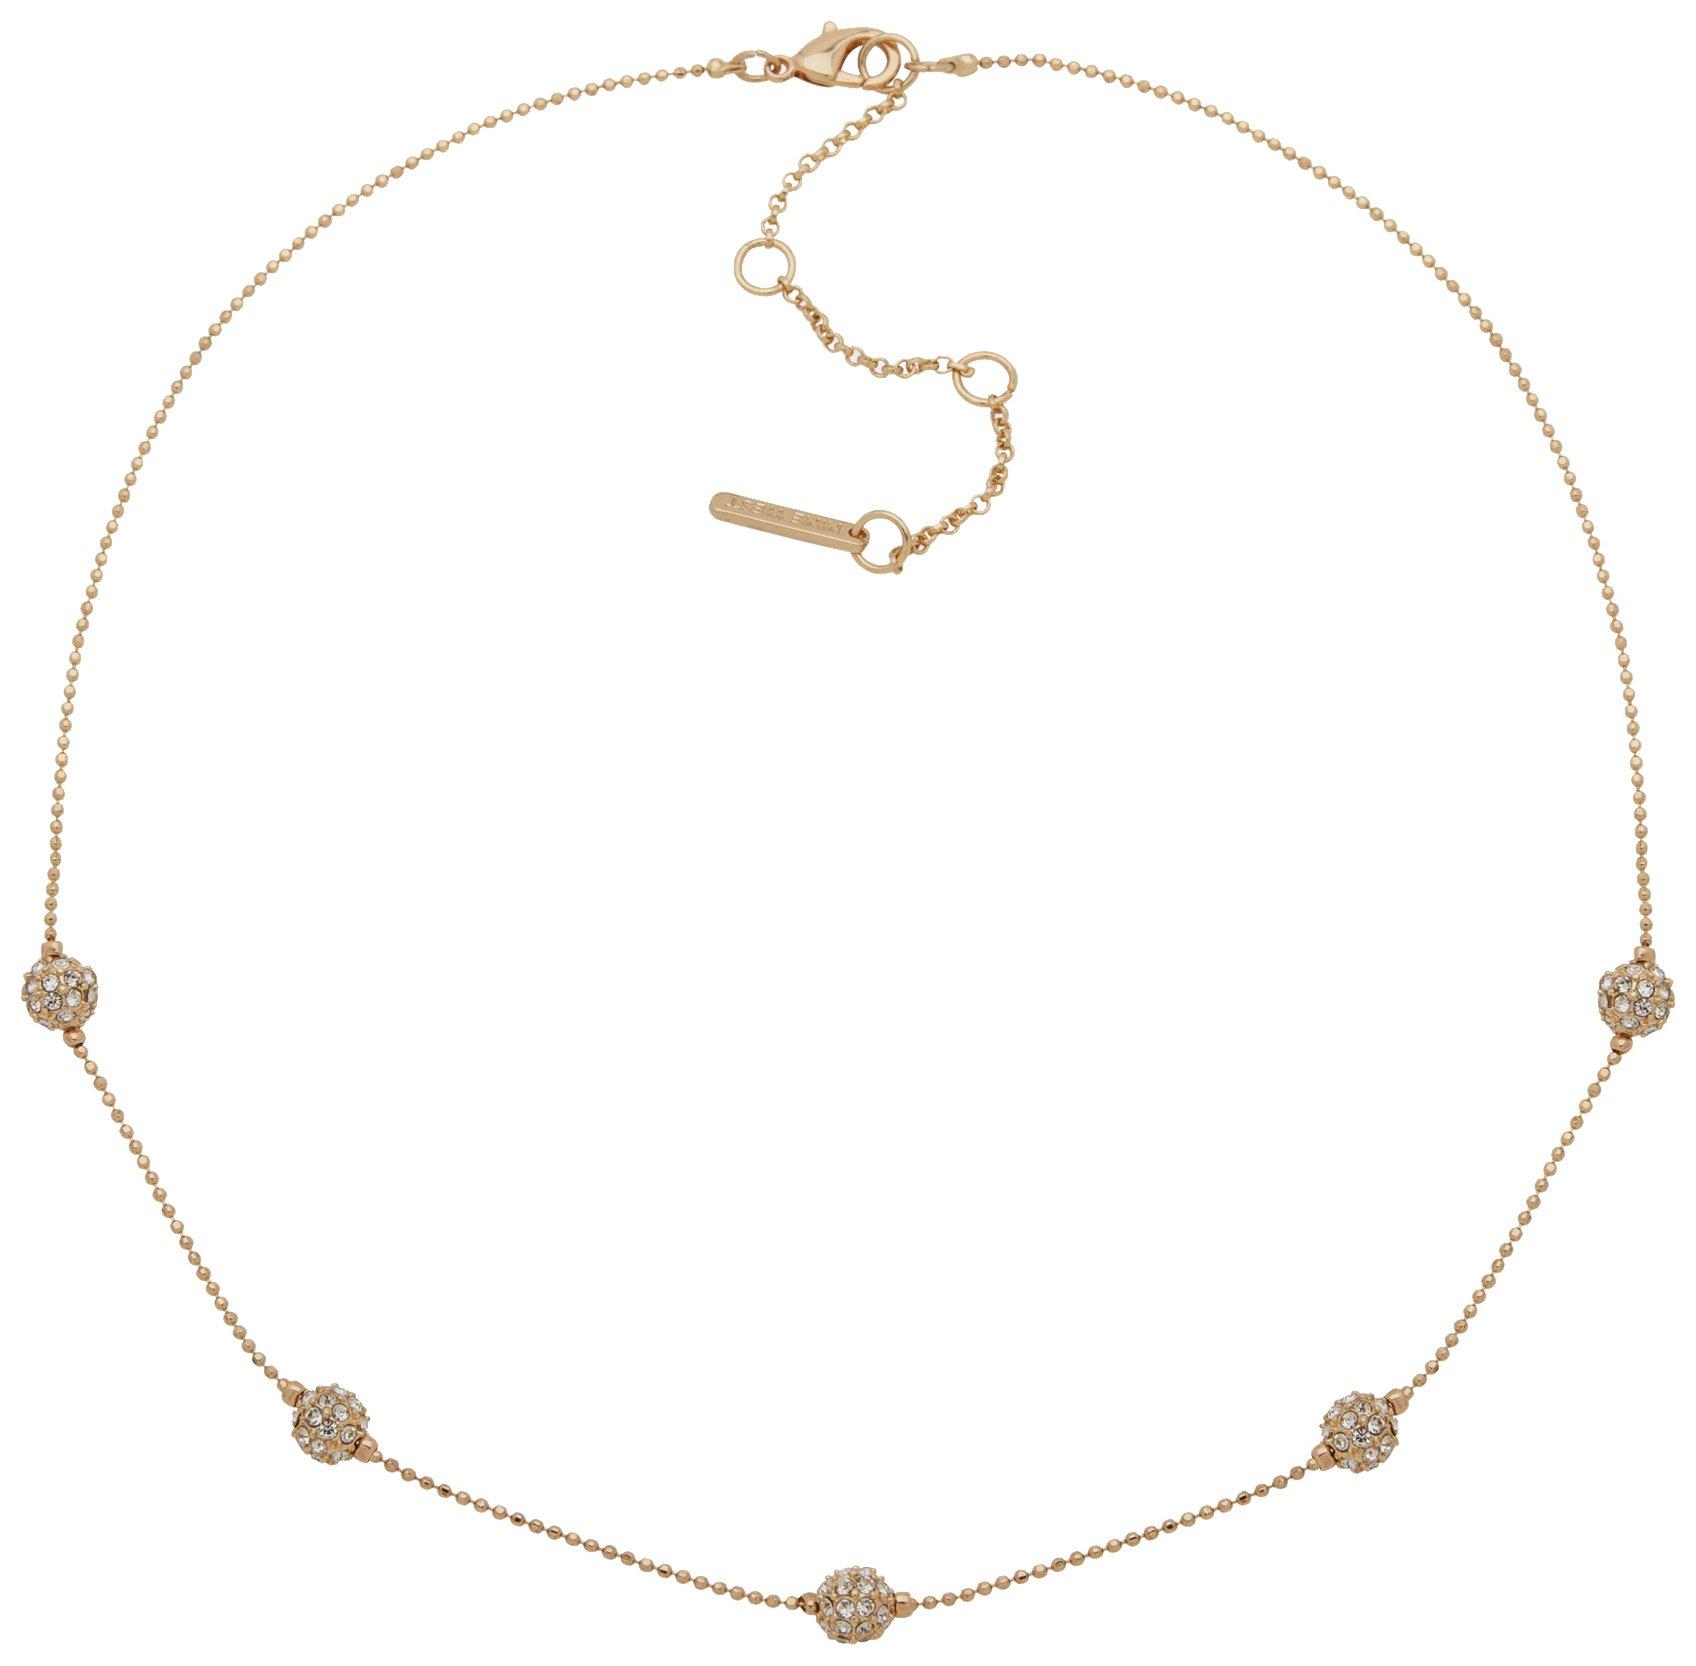 Nine West 17 In. Pave Fireball Frontal Chain Necklace